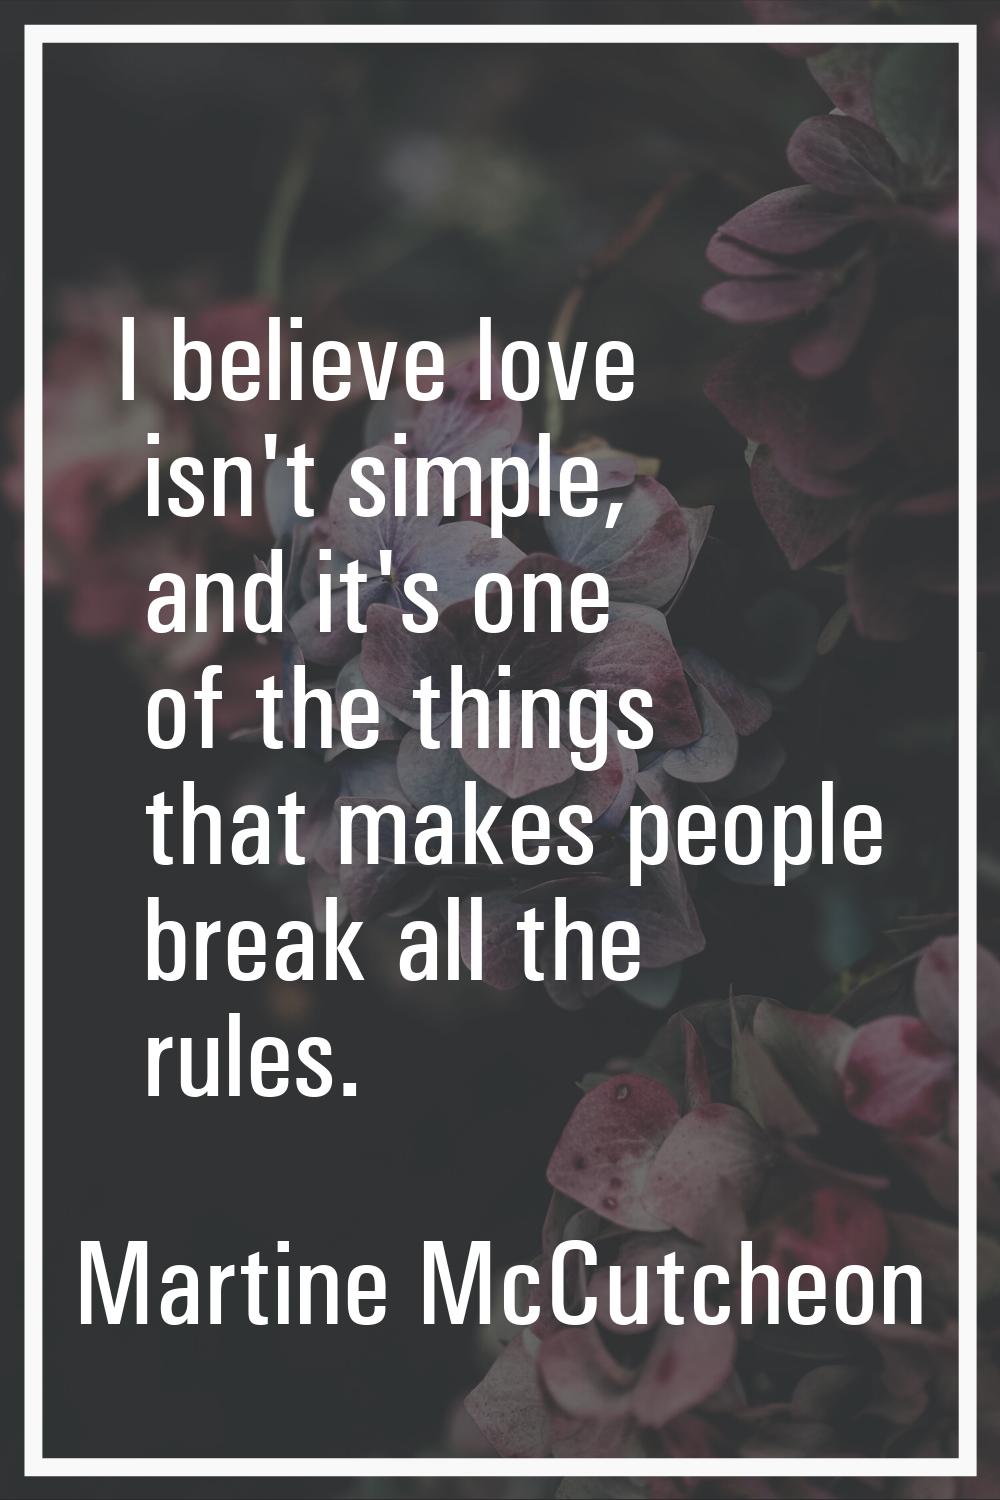 I believe love isn't simple, and it's one of the things that makes people break all the rules.